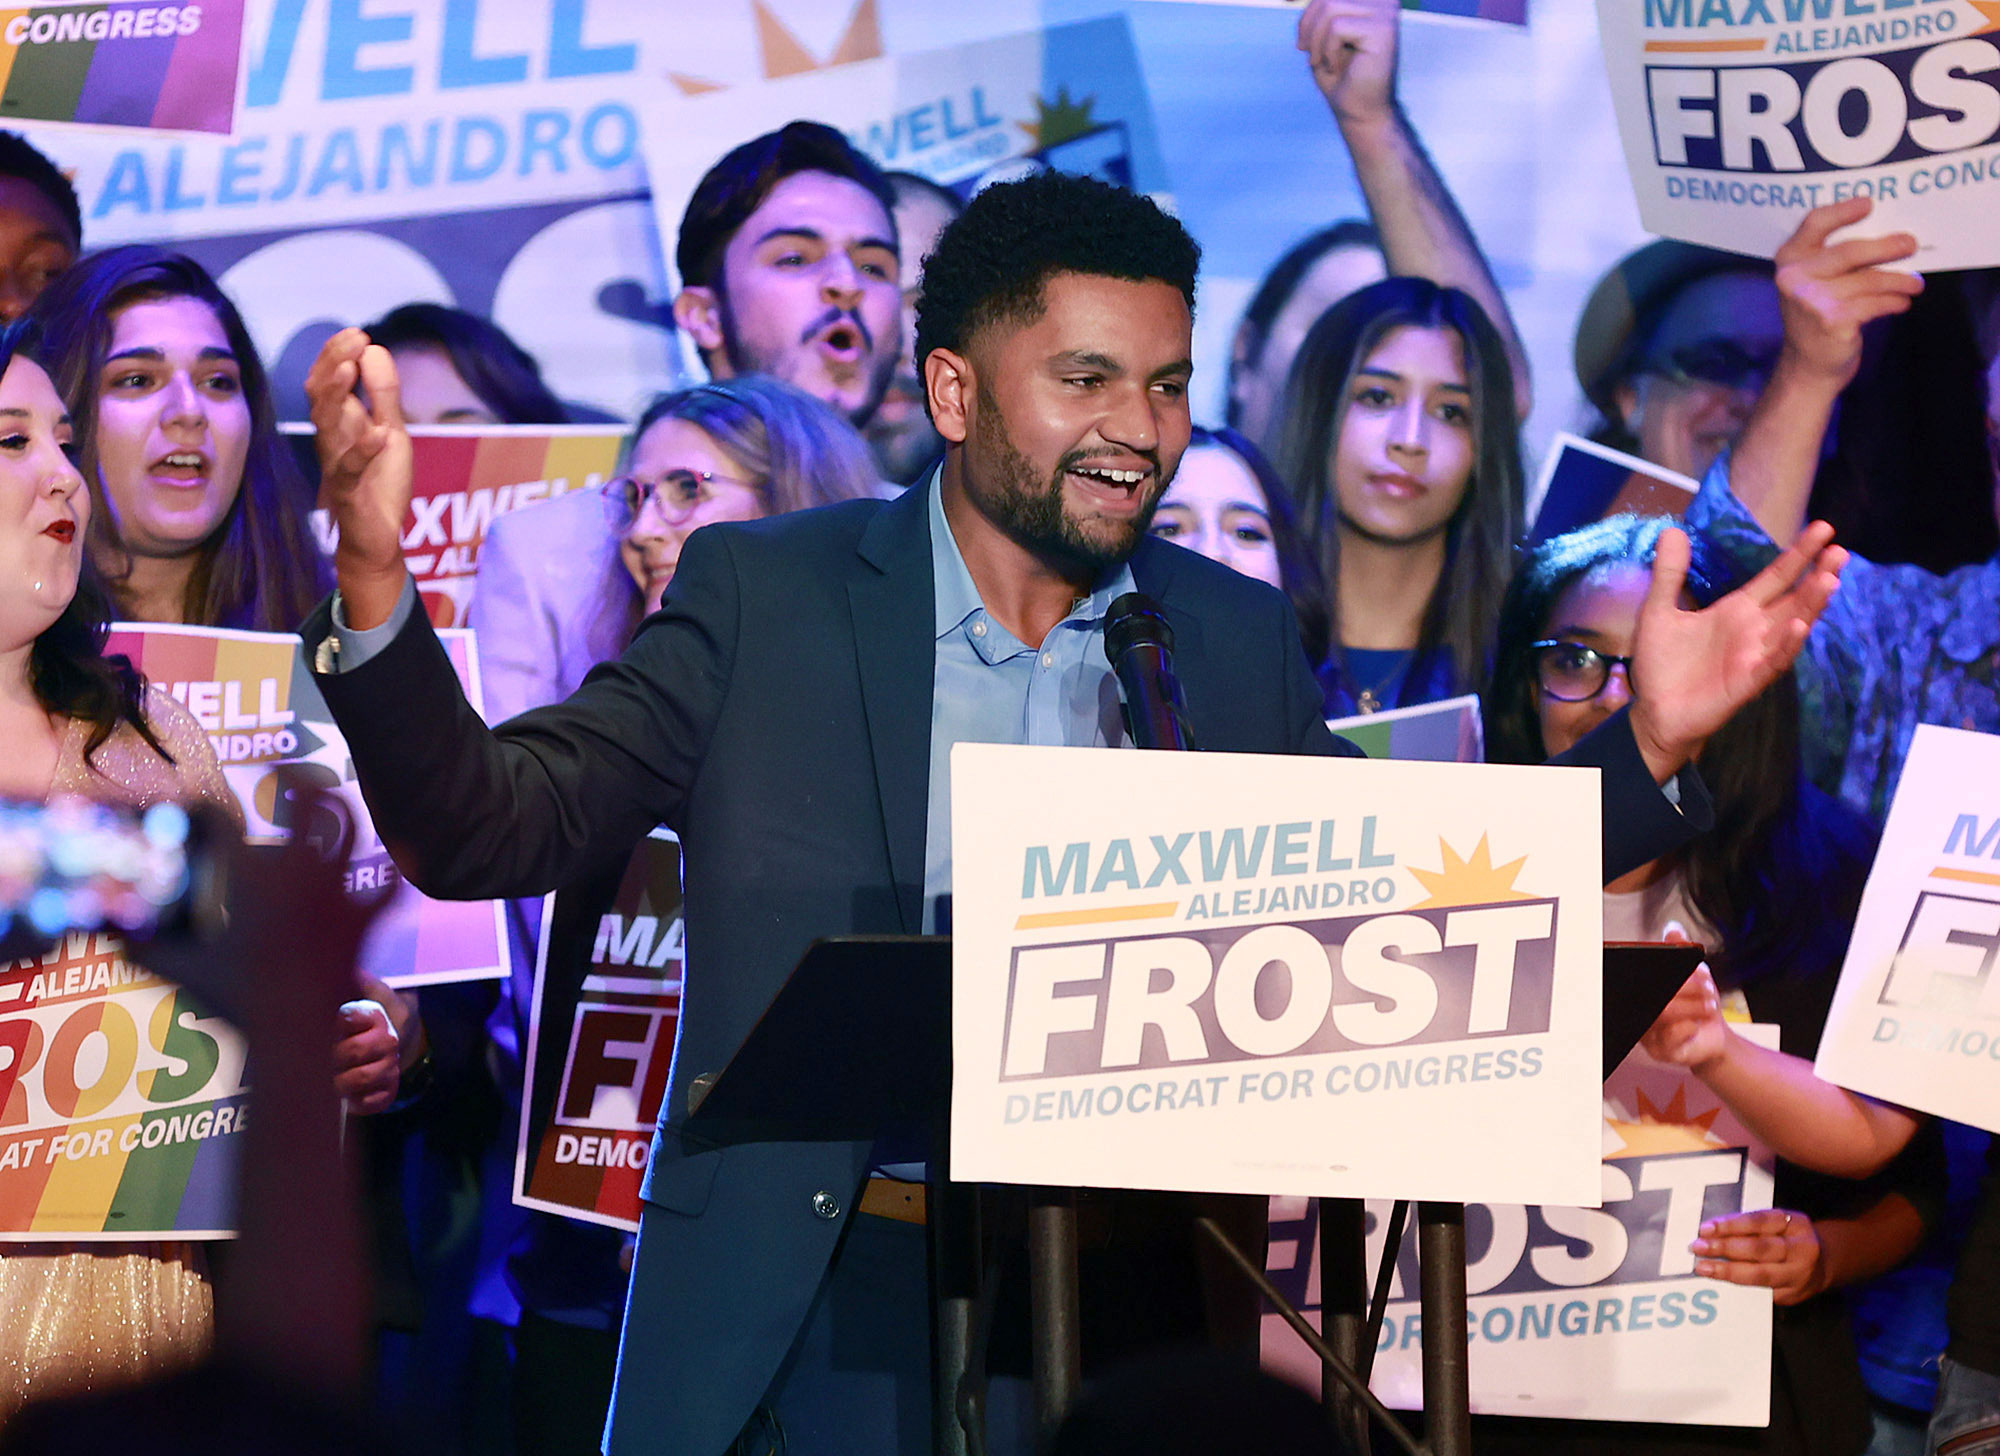 Florida's 10th Congressional District Democratic candidate Maxwell Frost speaks as he celebrates with supporters during a victory party at The Abbey in Orlando, Fla., on Tuesday, Nov. 8, 2022. (Steven M. Dowell - Orlando Sentinel /AP)